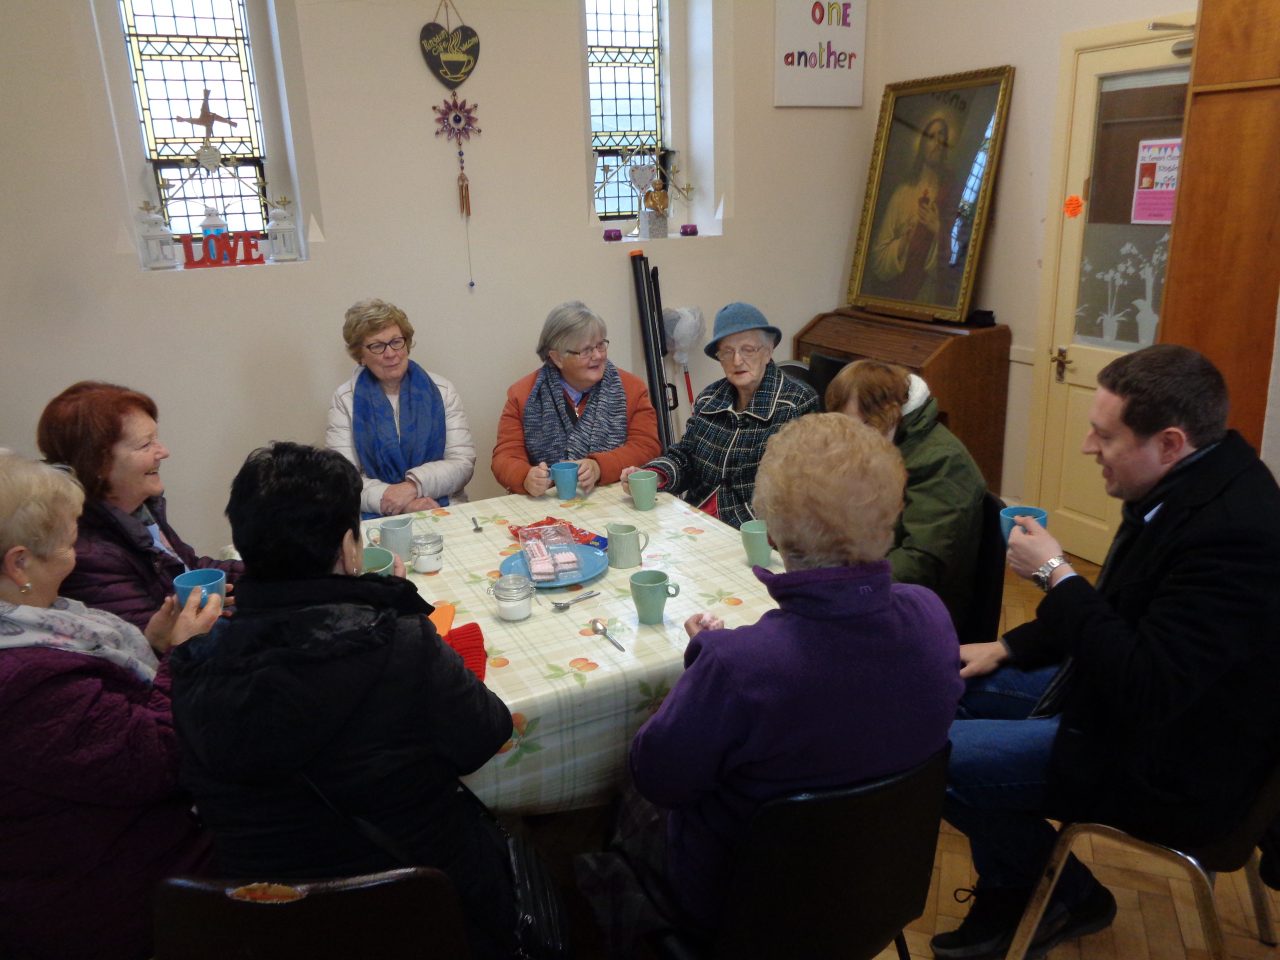 People gathered around the table in St. Teresa’s Kingdom Café, open every Thursday after the 10 am Mass.